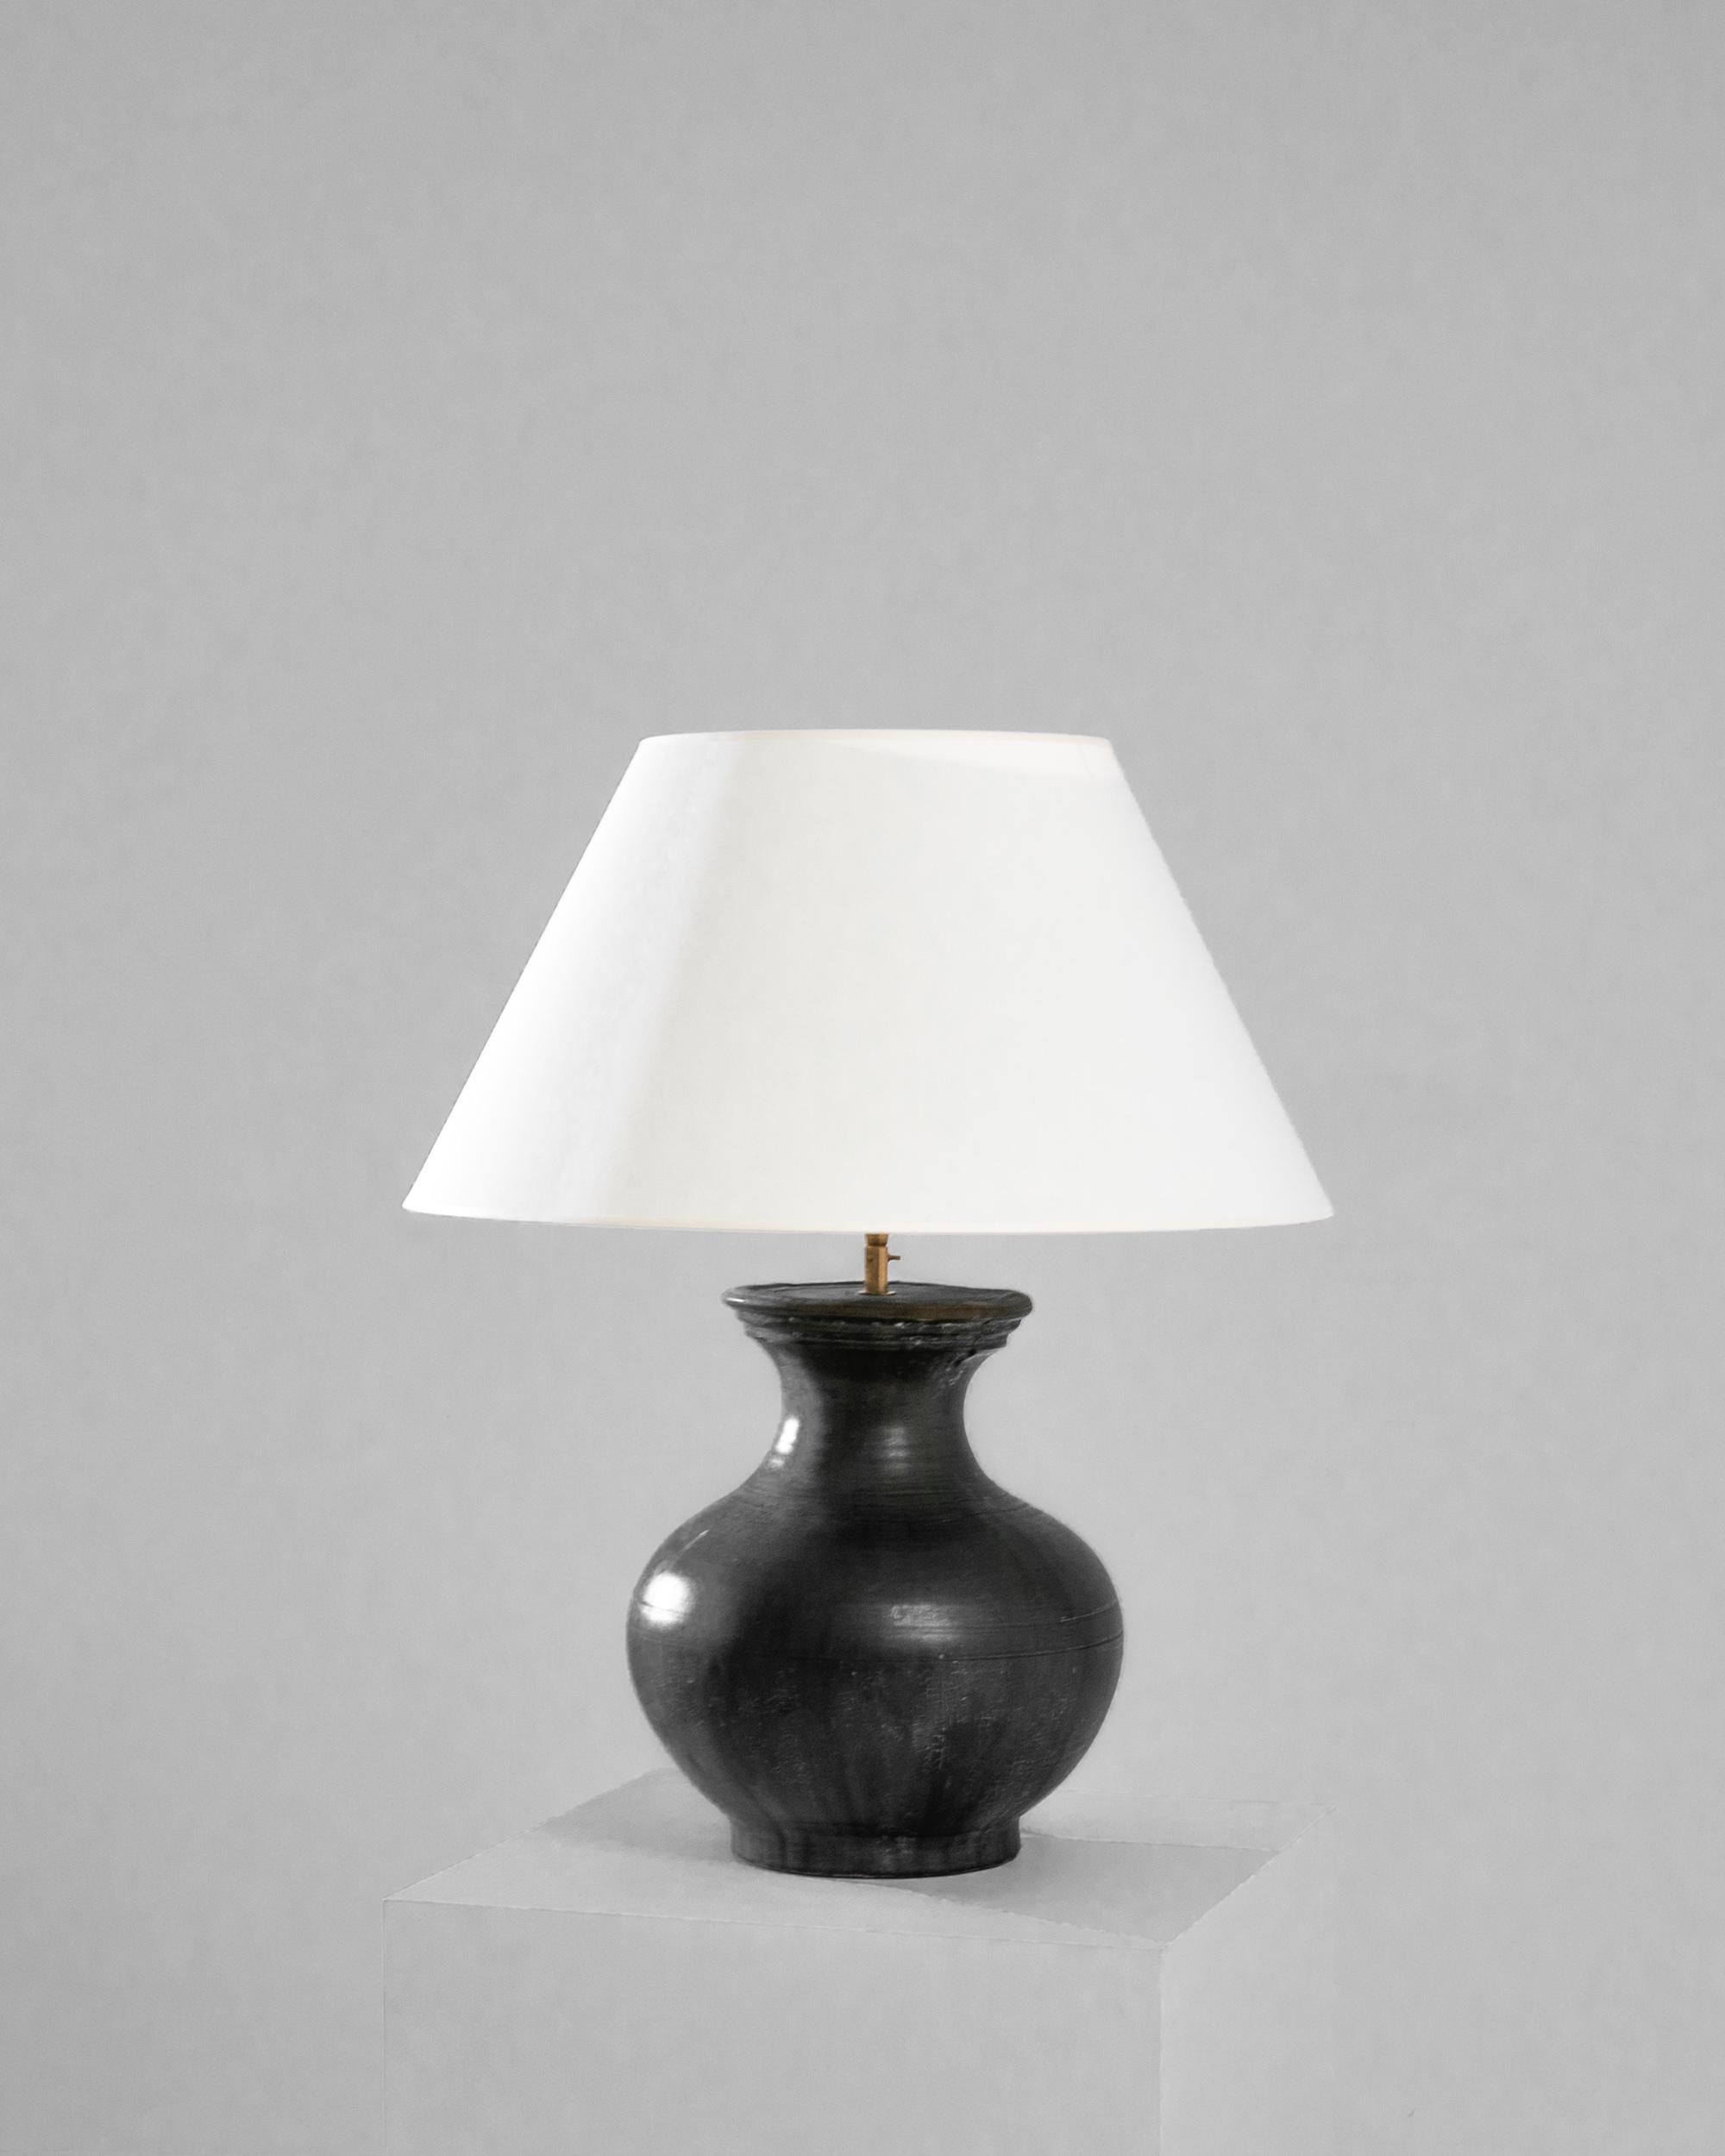 An exceptional find to inspire your collection. This vintage Chinese vase has been adapted into a beautiful table lamp. Polished brass meets the charcoal black glaze, enlightening your space with an uncompromising contrast. The textured glaze,